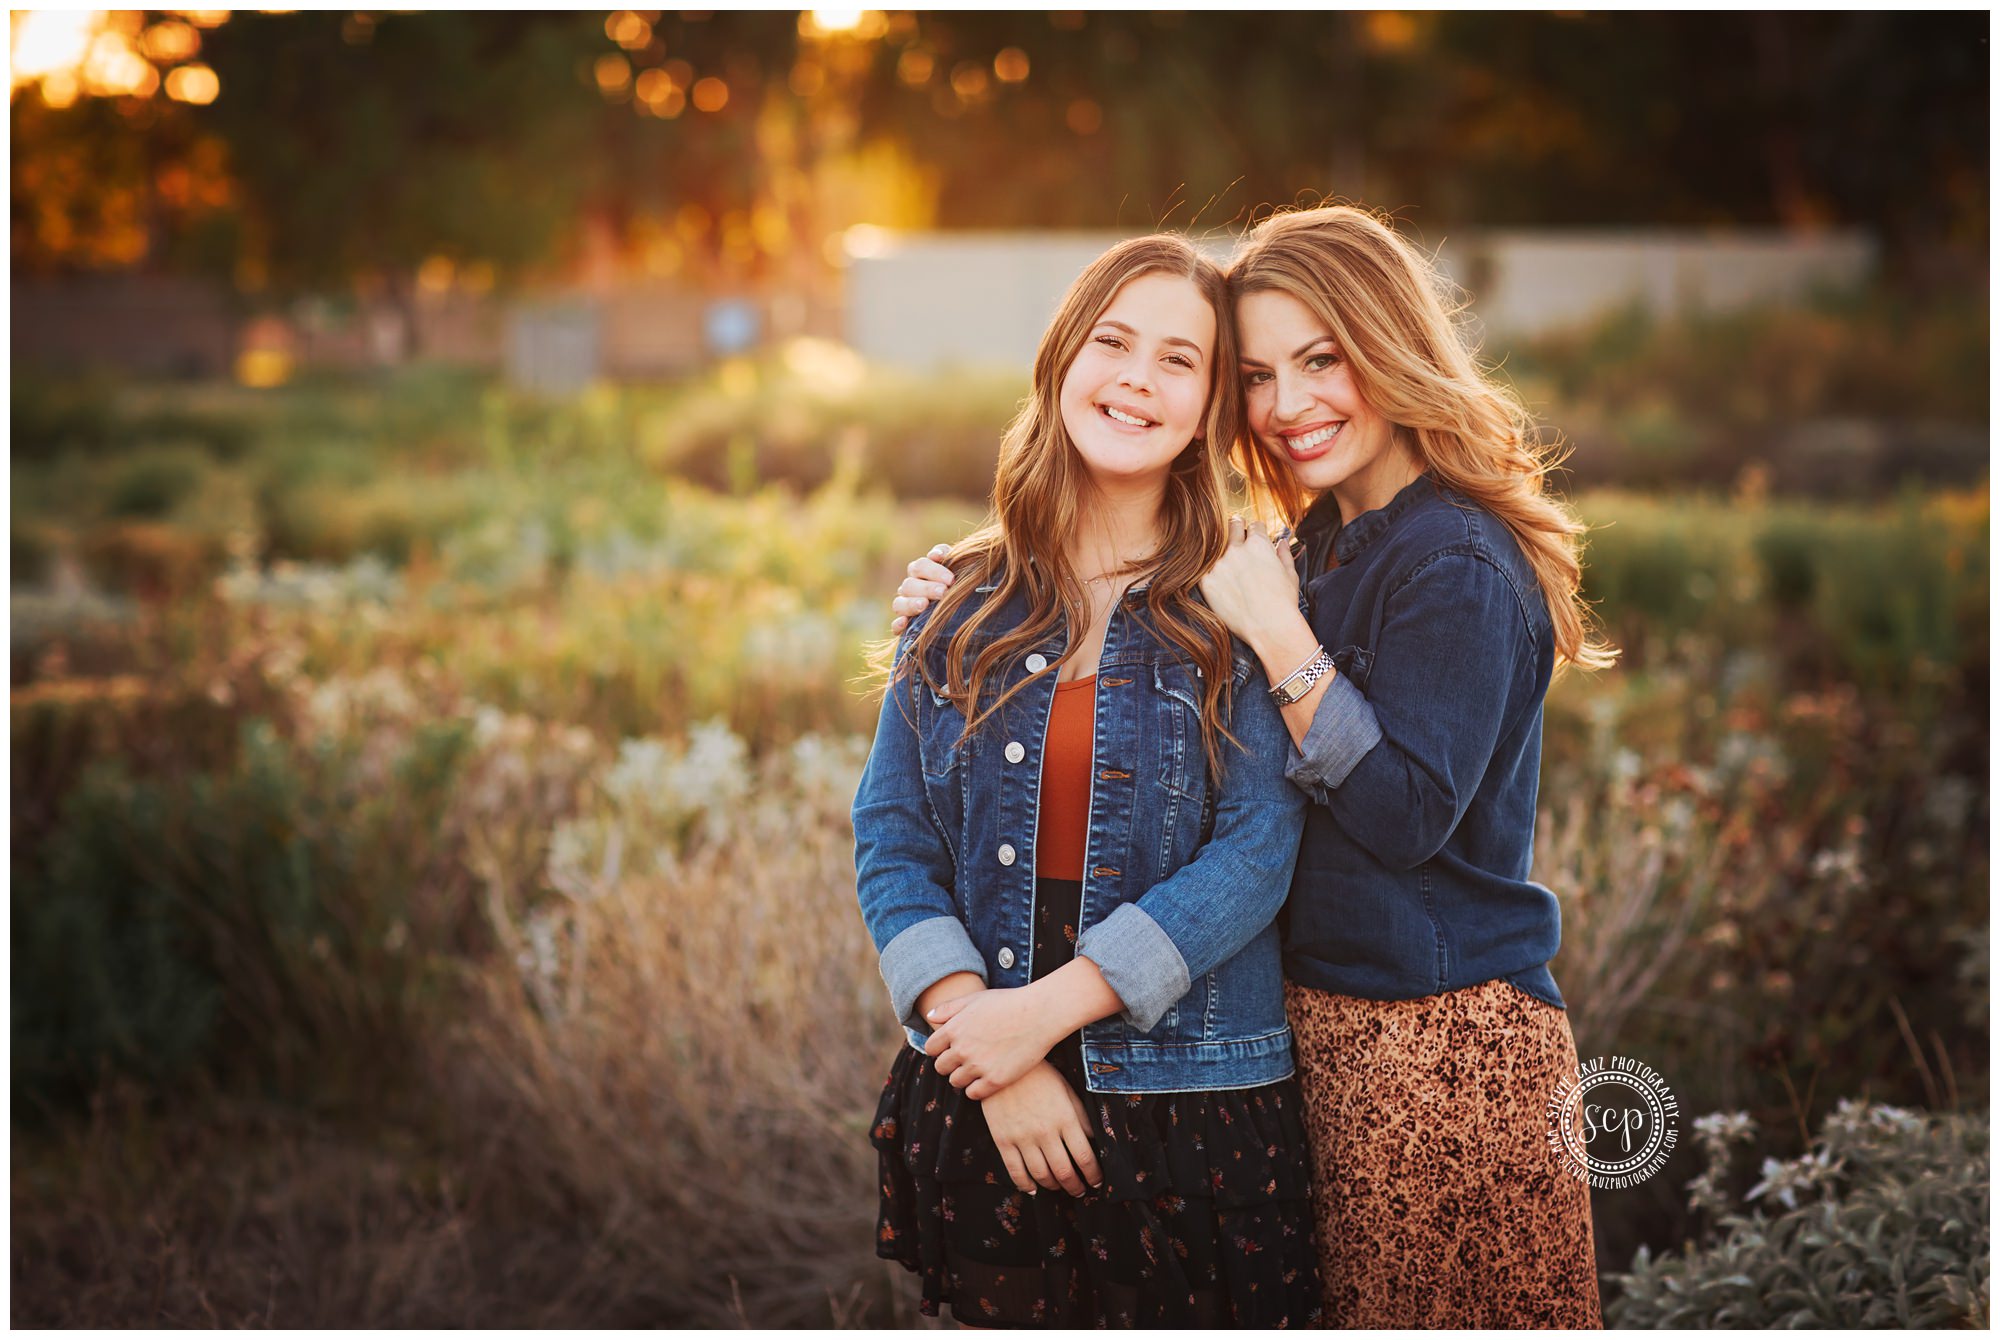 How to pose with tween/teen Girls  Family photo ideas with older